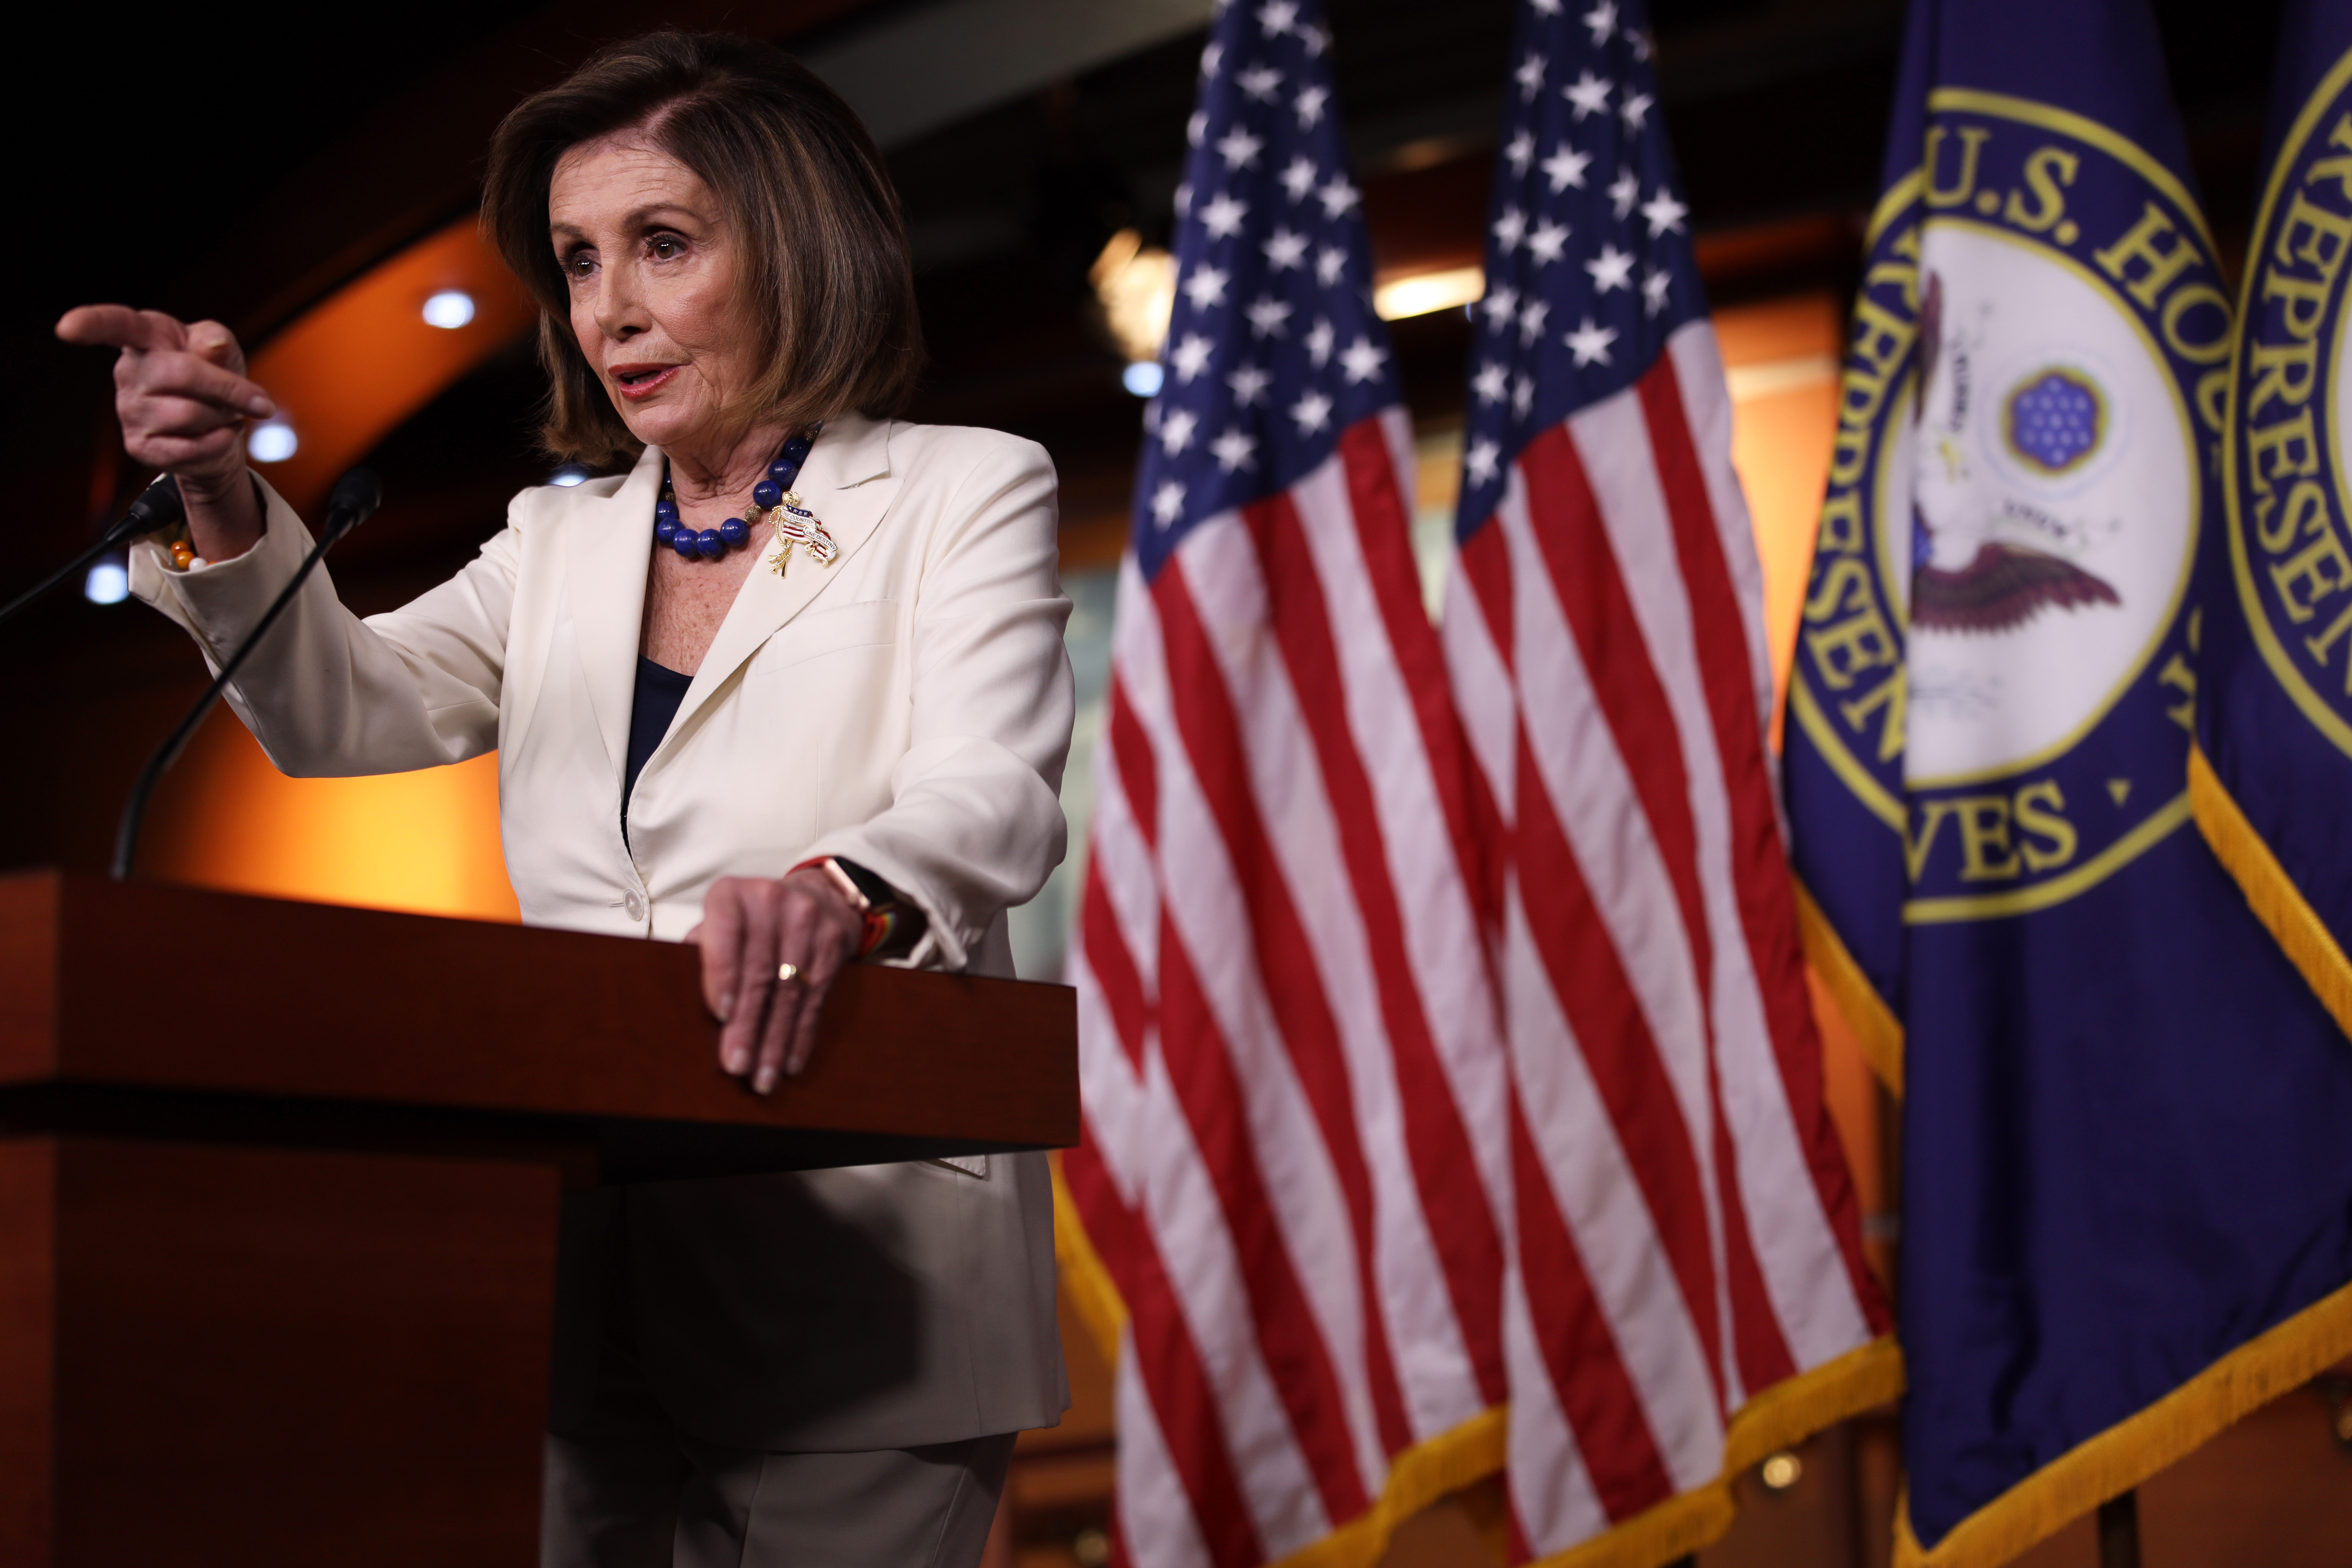 WASHINGTON, DC - DECEMBER 05:U.S. Speaker of the House Rep. Nancy Pelosi (D-CA) speaks during her weekly news conference December 5, 2019 on Capitol Hill in Washington, DC. Speaker Pelosi dis